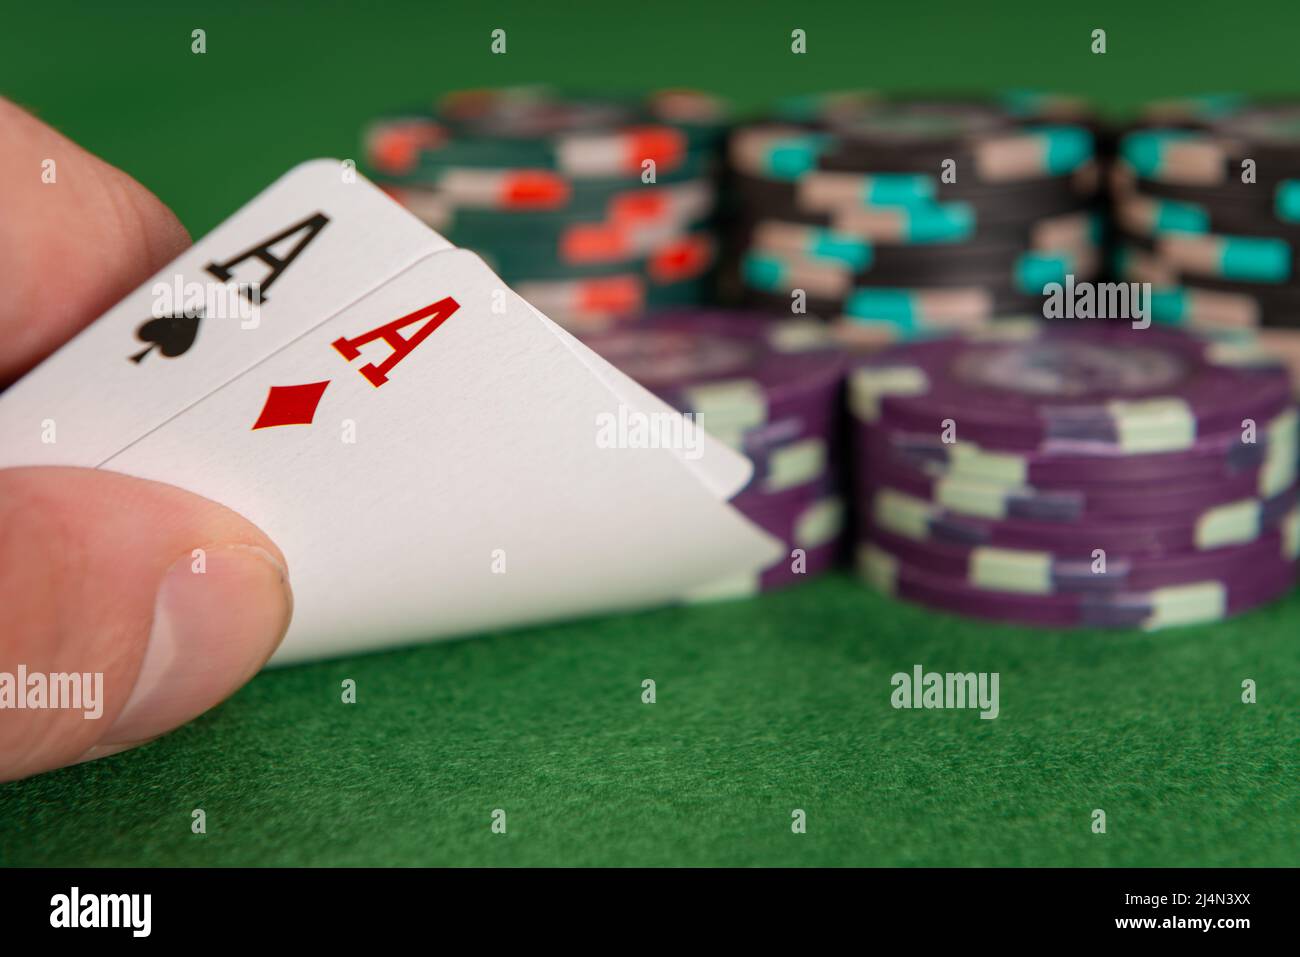 A Caucasian hand lifts the corner of two playing cards, revealing that both are aces. In the background is several stacks of chips. Stock Photo